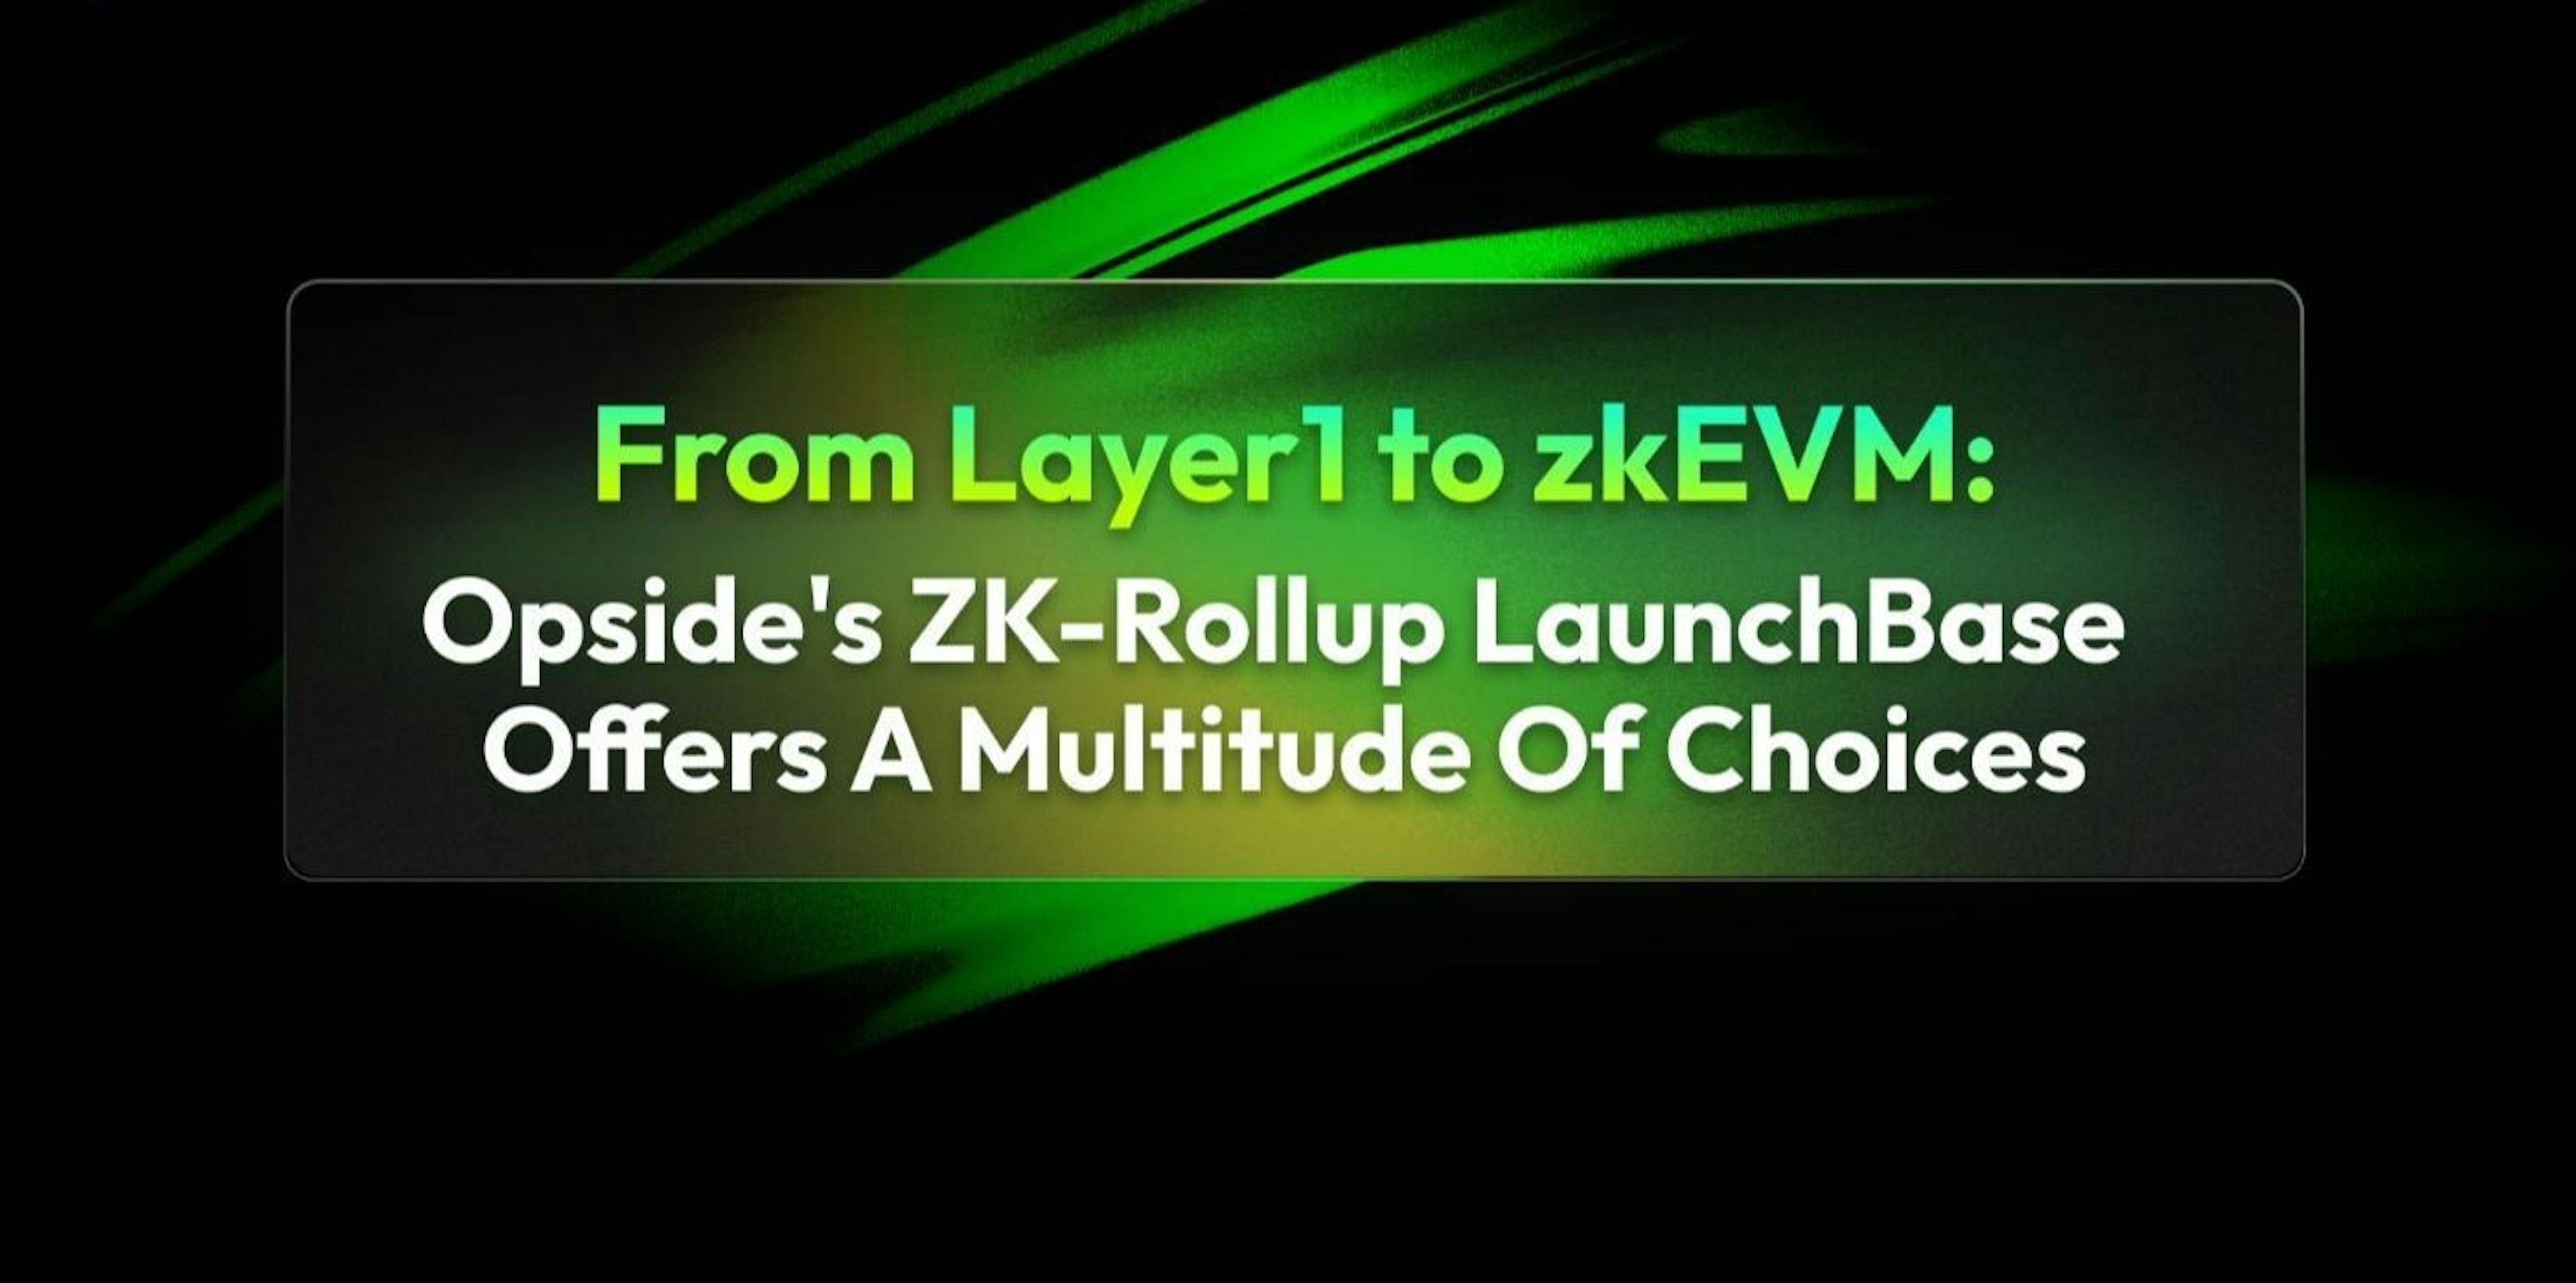 featured image - 从 Layer1 到 zkEVM：Opside 的 ZK-Rollup LaunchBase 提供多种选择